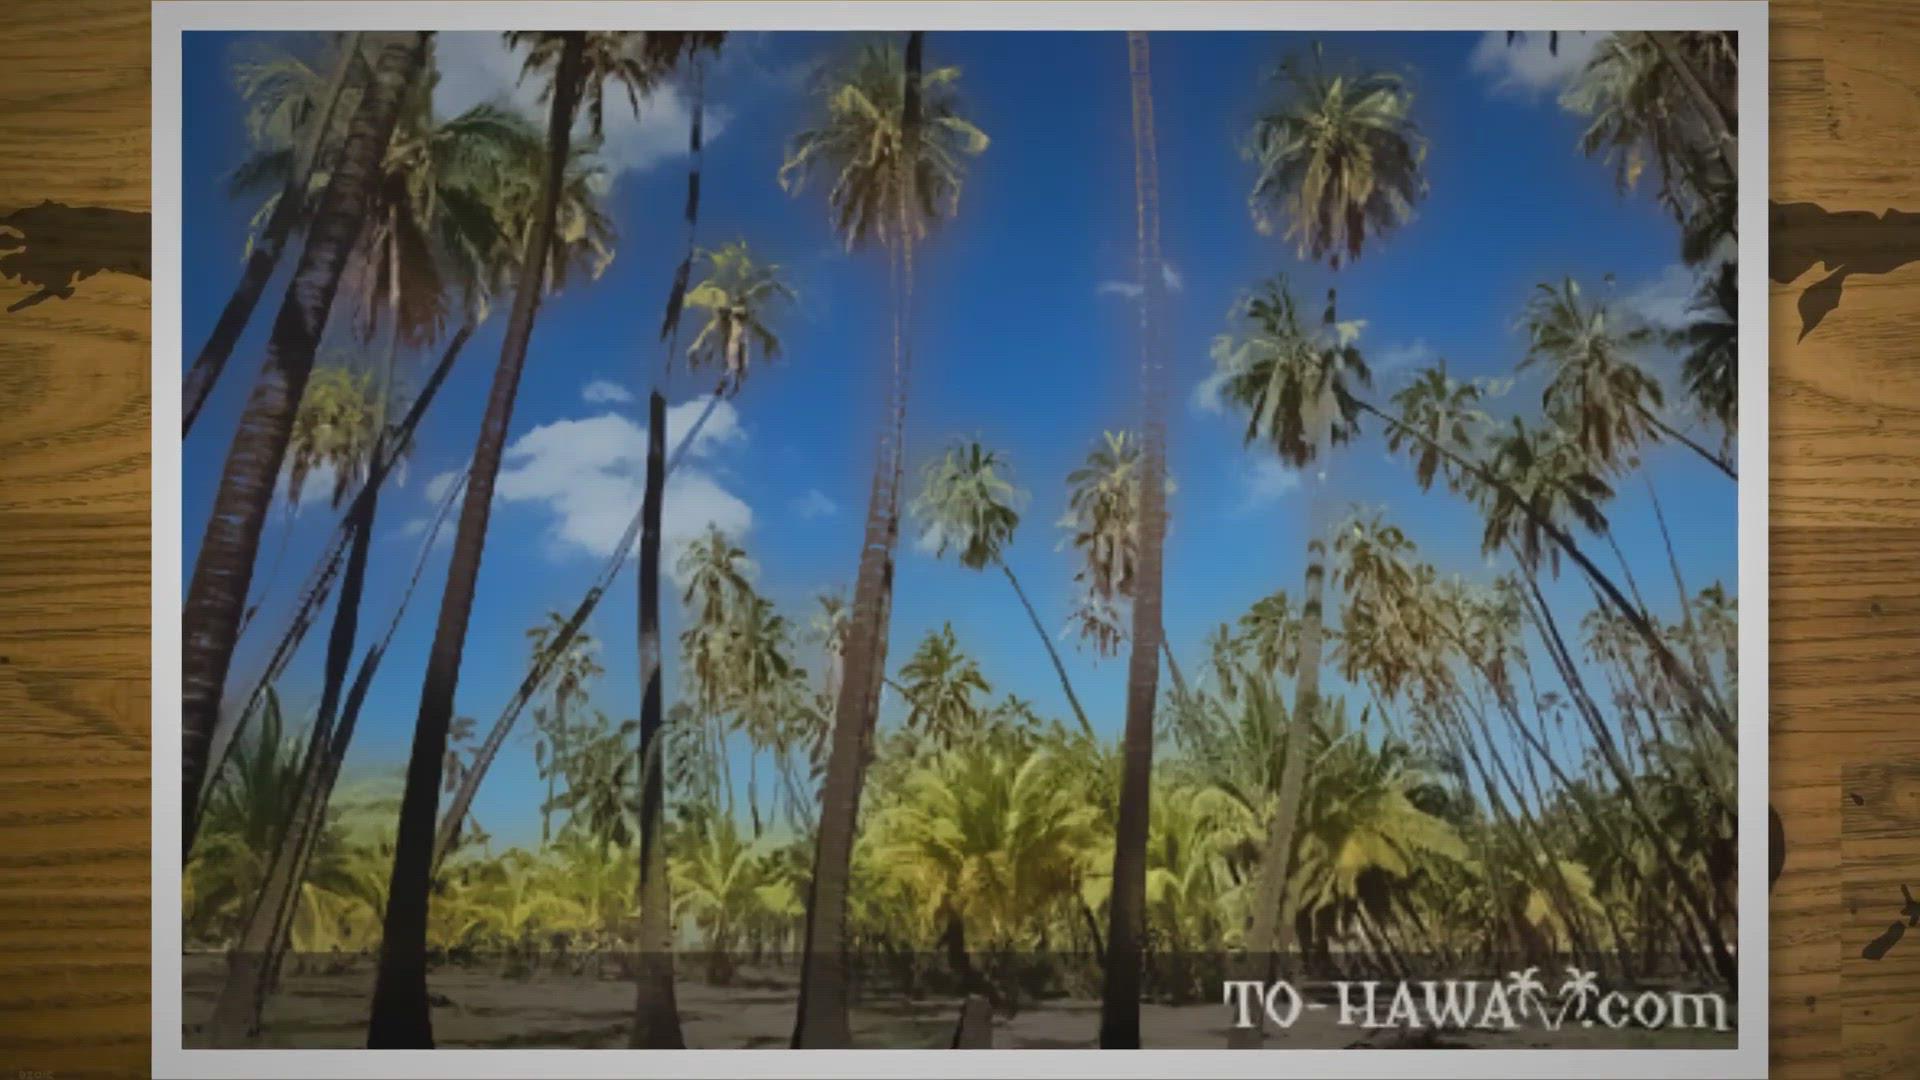 'Video thumbnail for Hawaii Travel Guide'